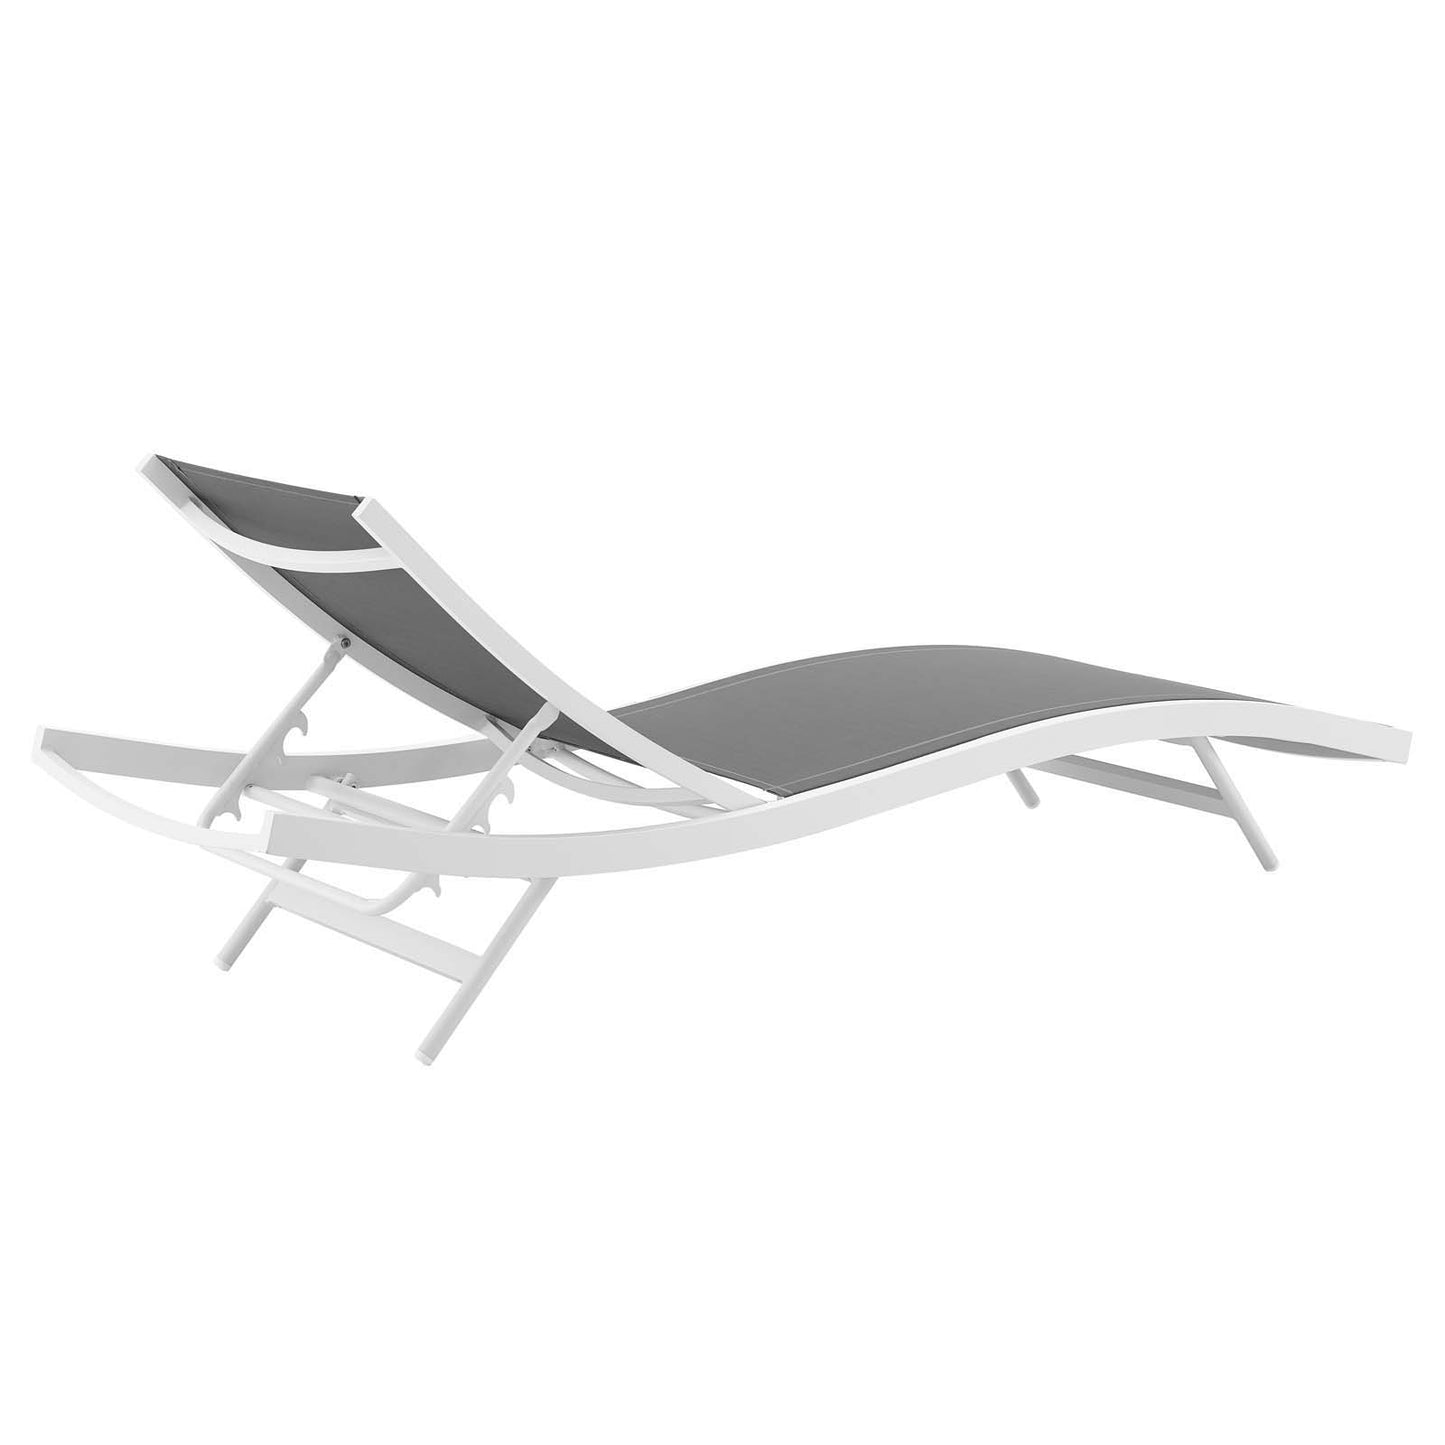 Glimpse Outdoor Patio Mesh Chaise Lounge Set of 2 White Gray EEI-4038-WHI-GRY